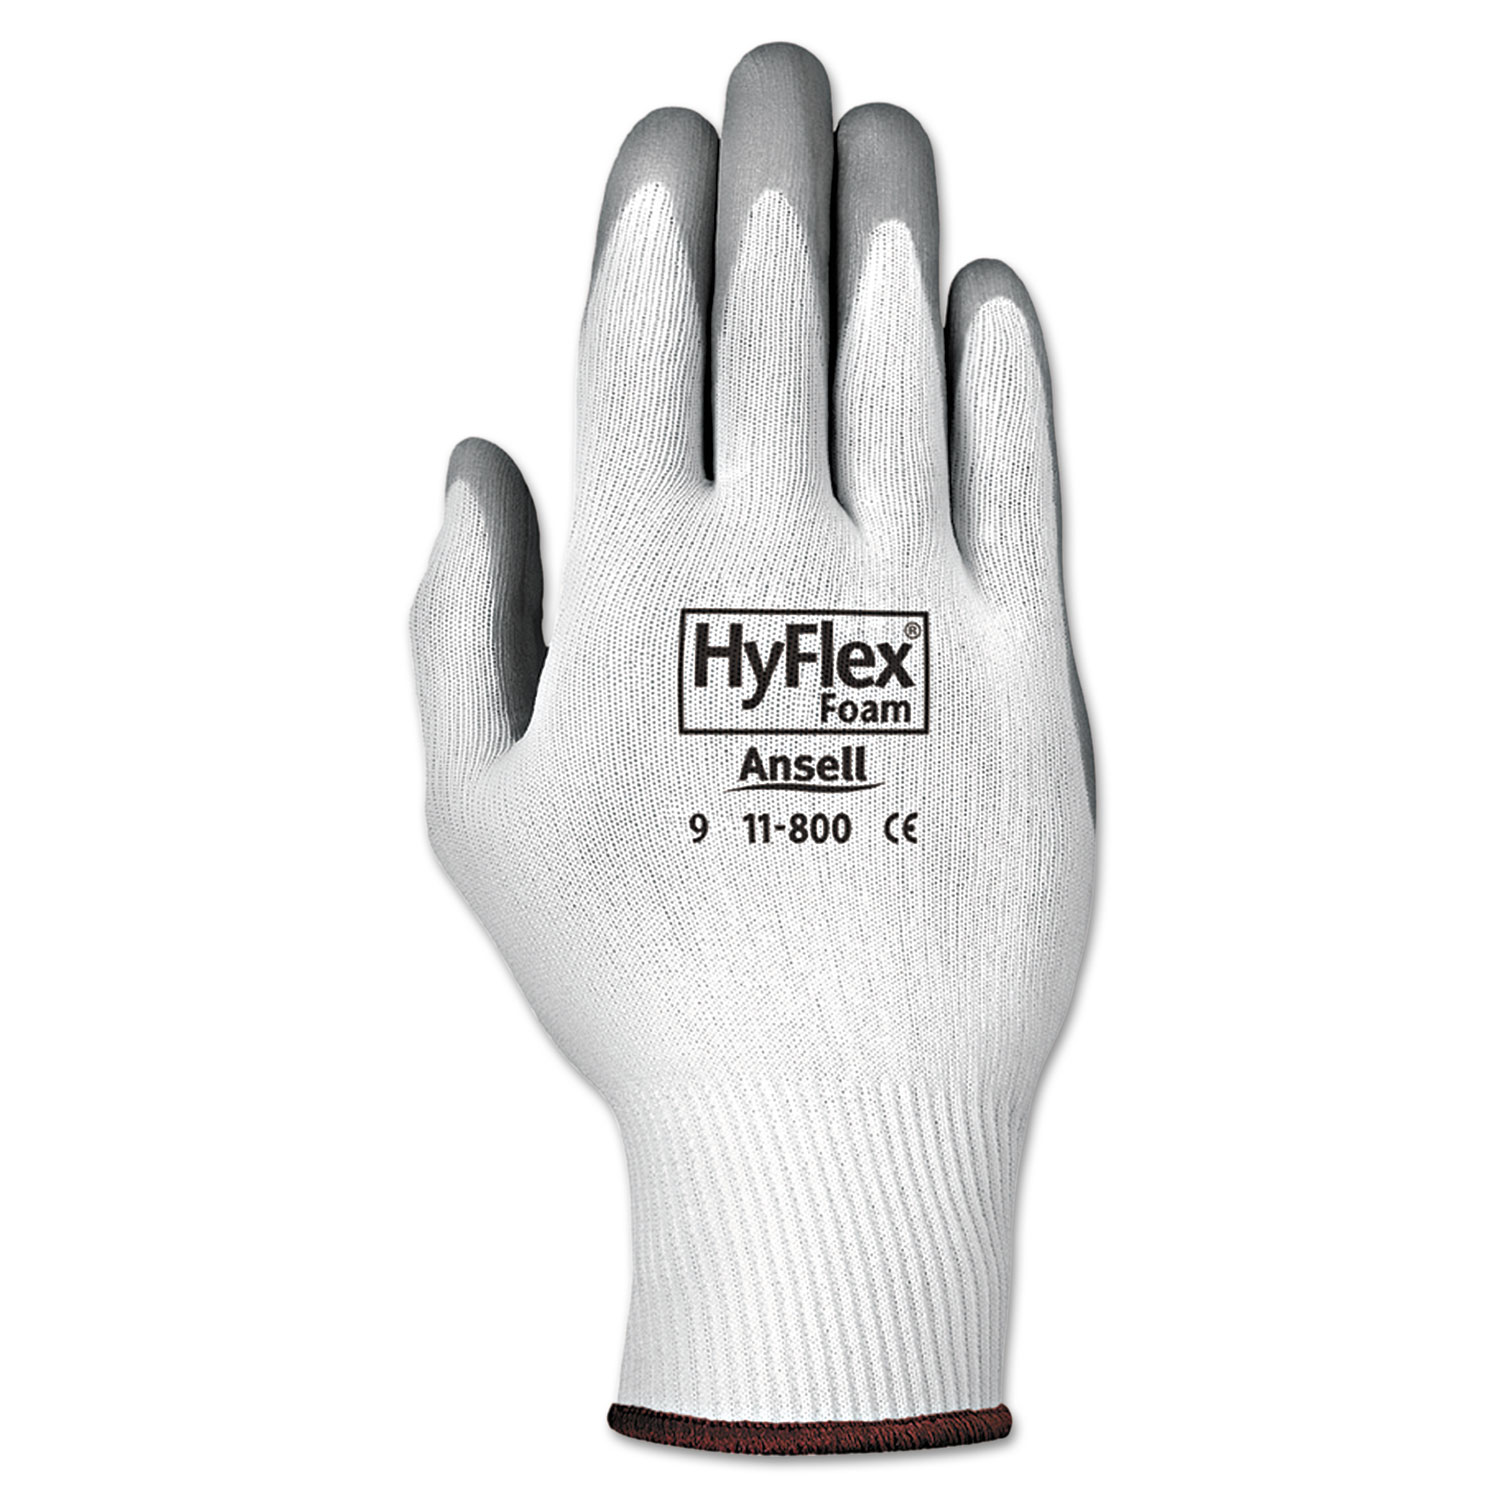  AnsellPro 103333 HyFlex Foam Gloves, White/Gray, Size 9, 12 Pairs (ANS118009) 